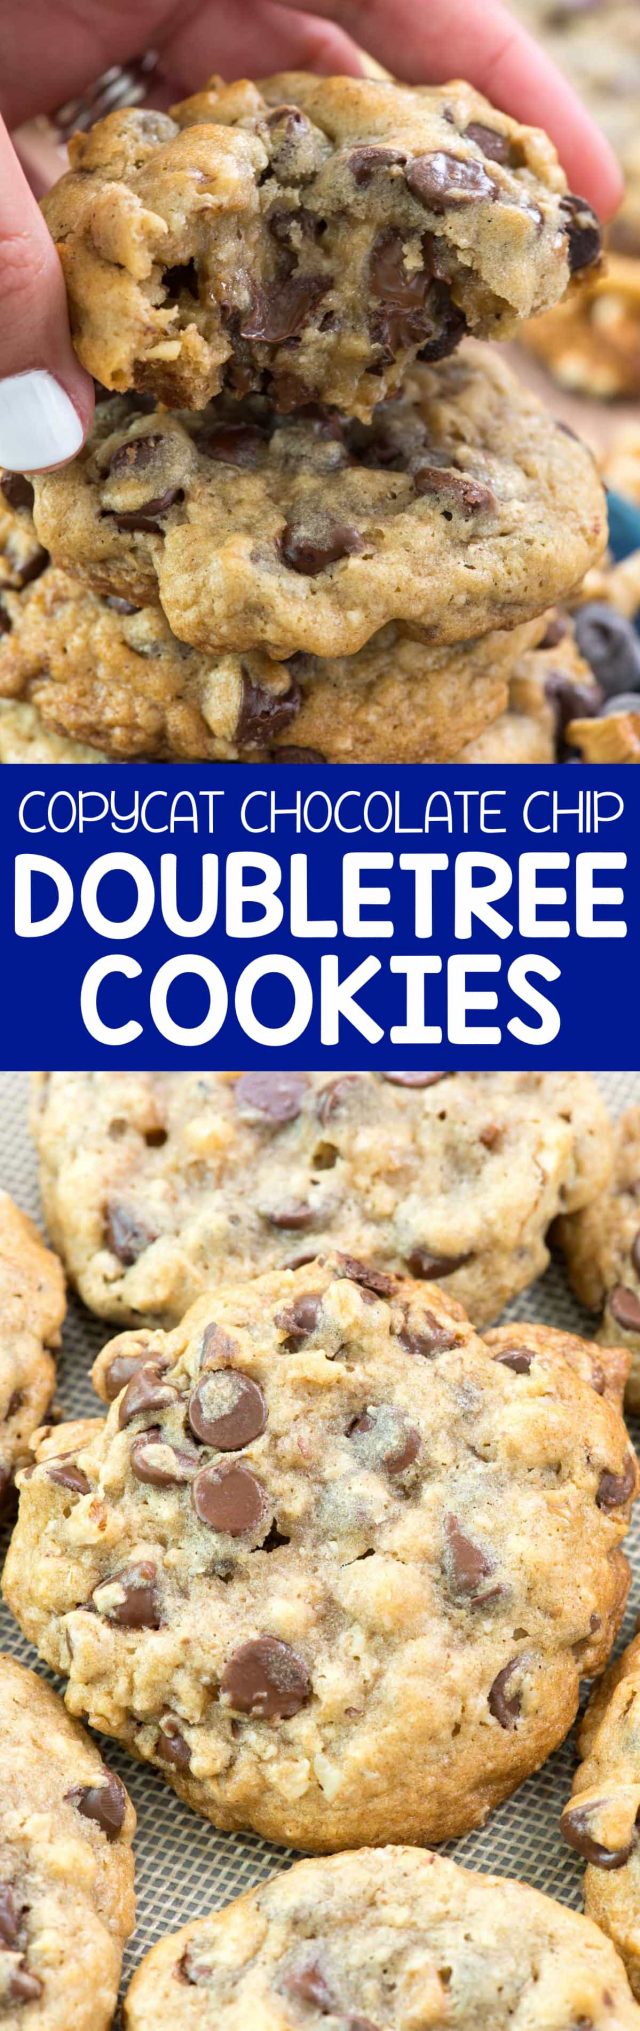 This chocolate chip cookie recipe is even BETTER than the Doubletree Chocolate Chip Cookies!! It's gooey and full of chocolate, oats, and walnuts.